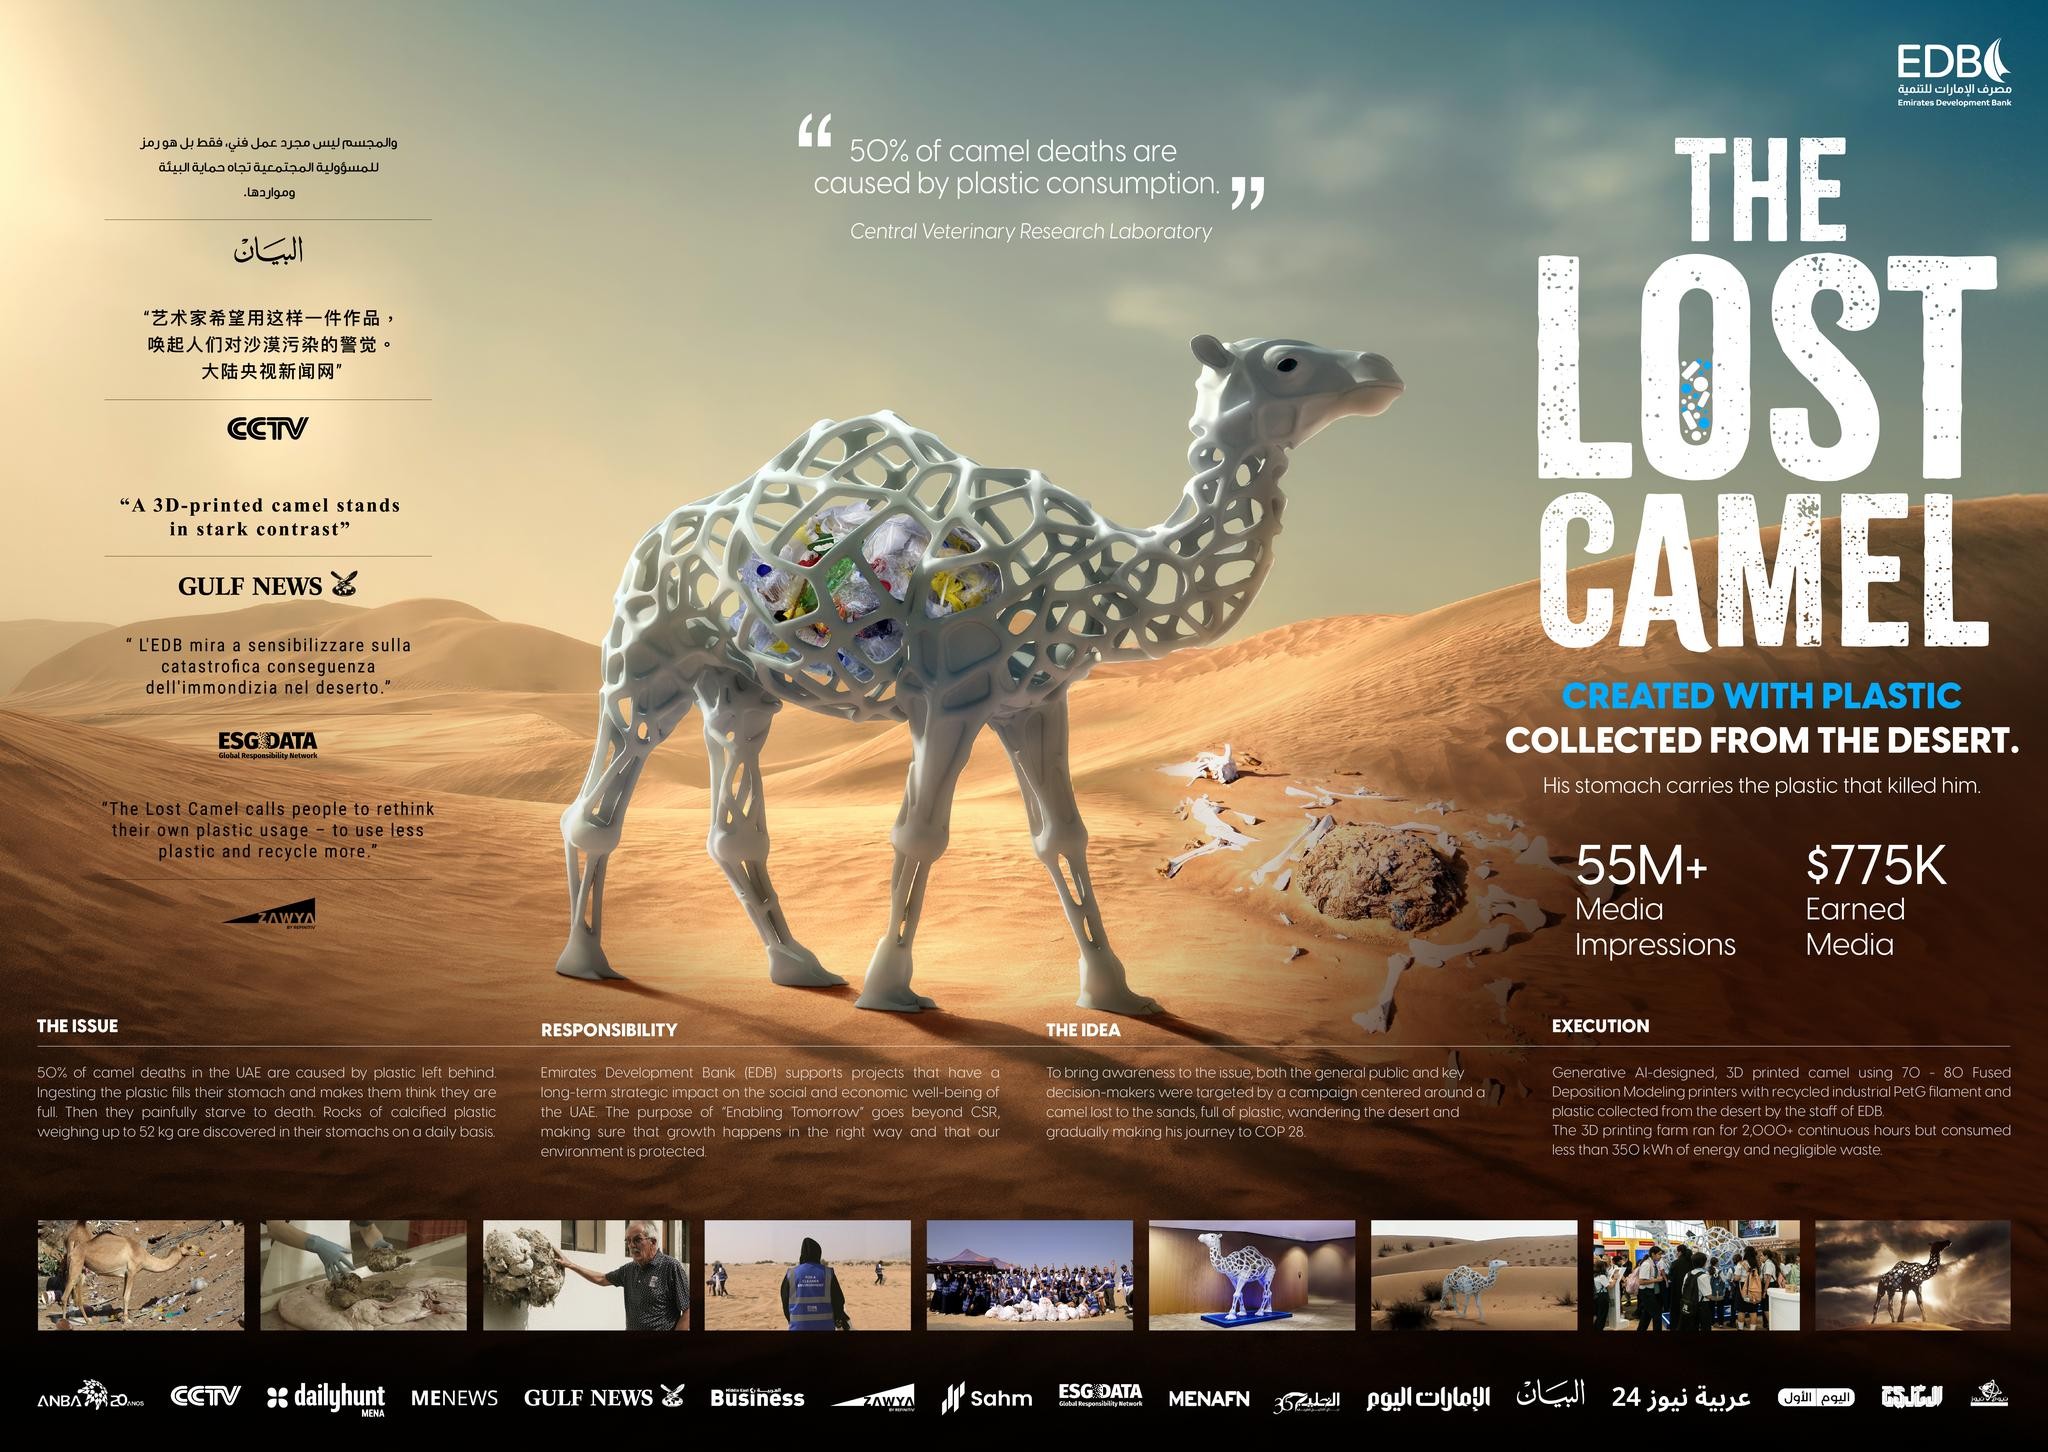 THE LOST CAMEL